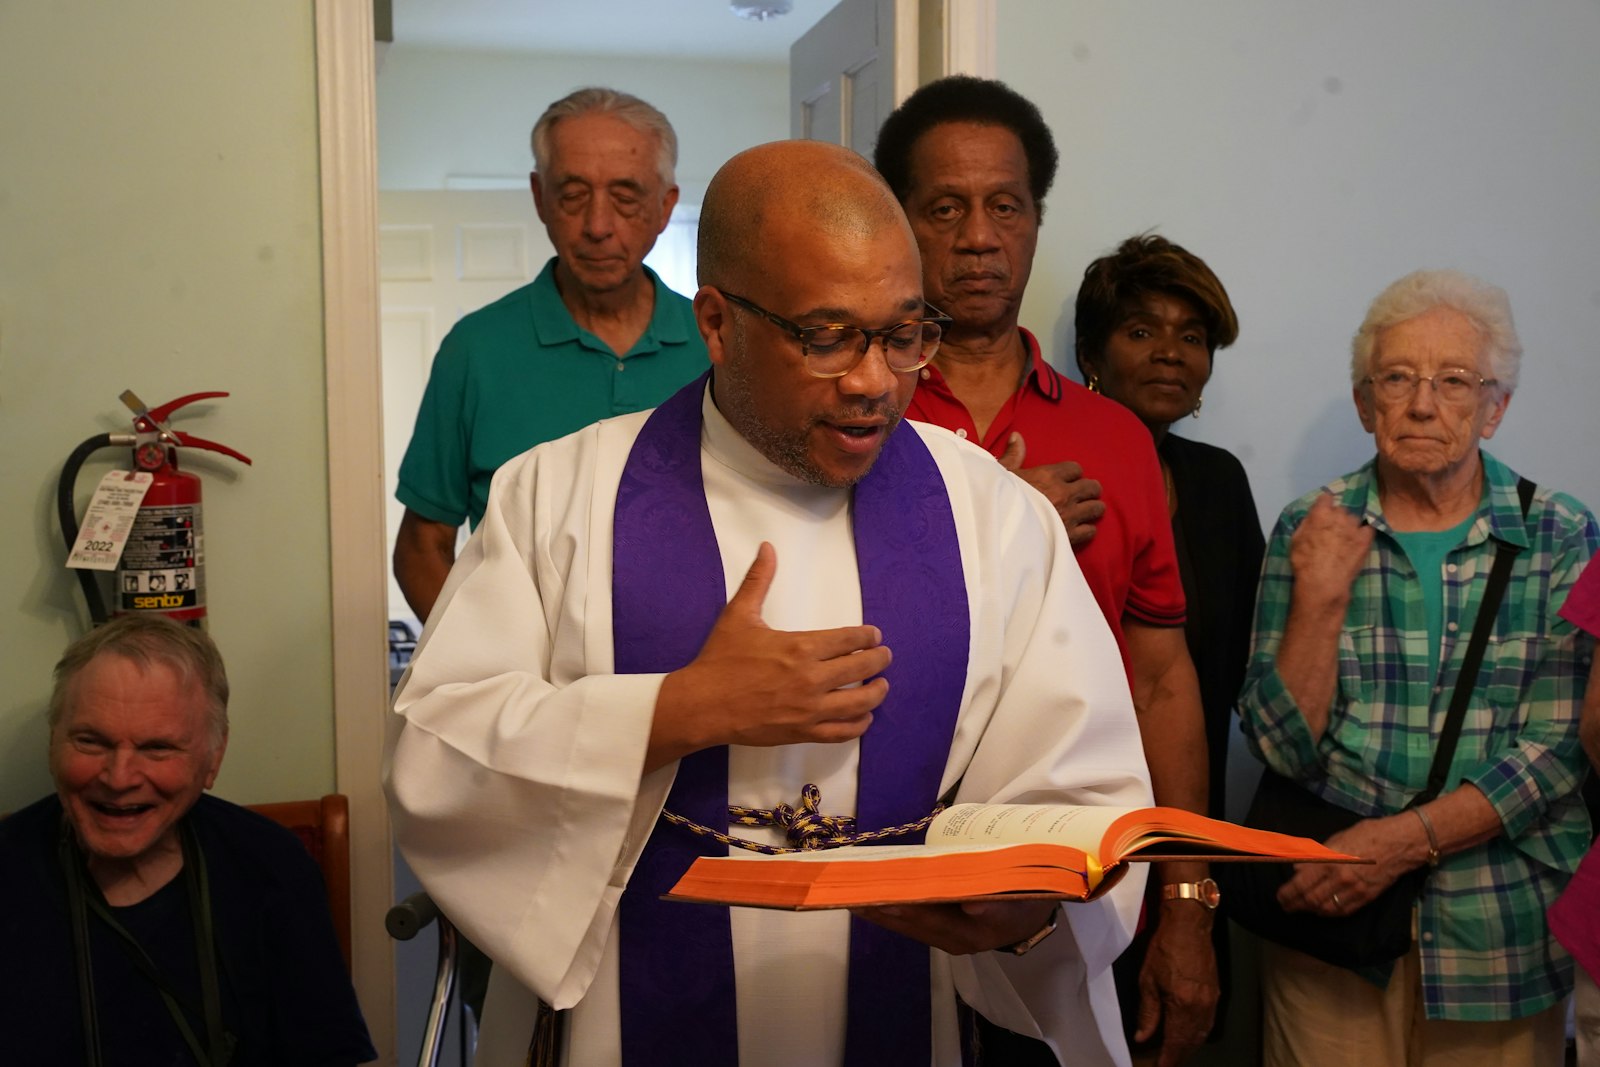 Fr. John McKenzie of Christ the King Parish blesses the Bakhita House on Sept. 7. Fr. McKenzie said it's appropriate to name a house that will shelter migrants after St. Josephine Bakhita, a woman from Sudan who was taken into slavery to Italy, where she eventually was granted her freedom and found faith in Christ.